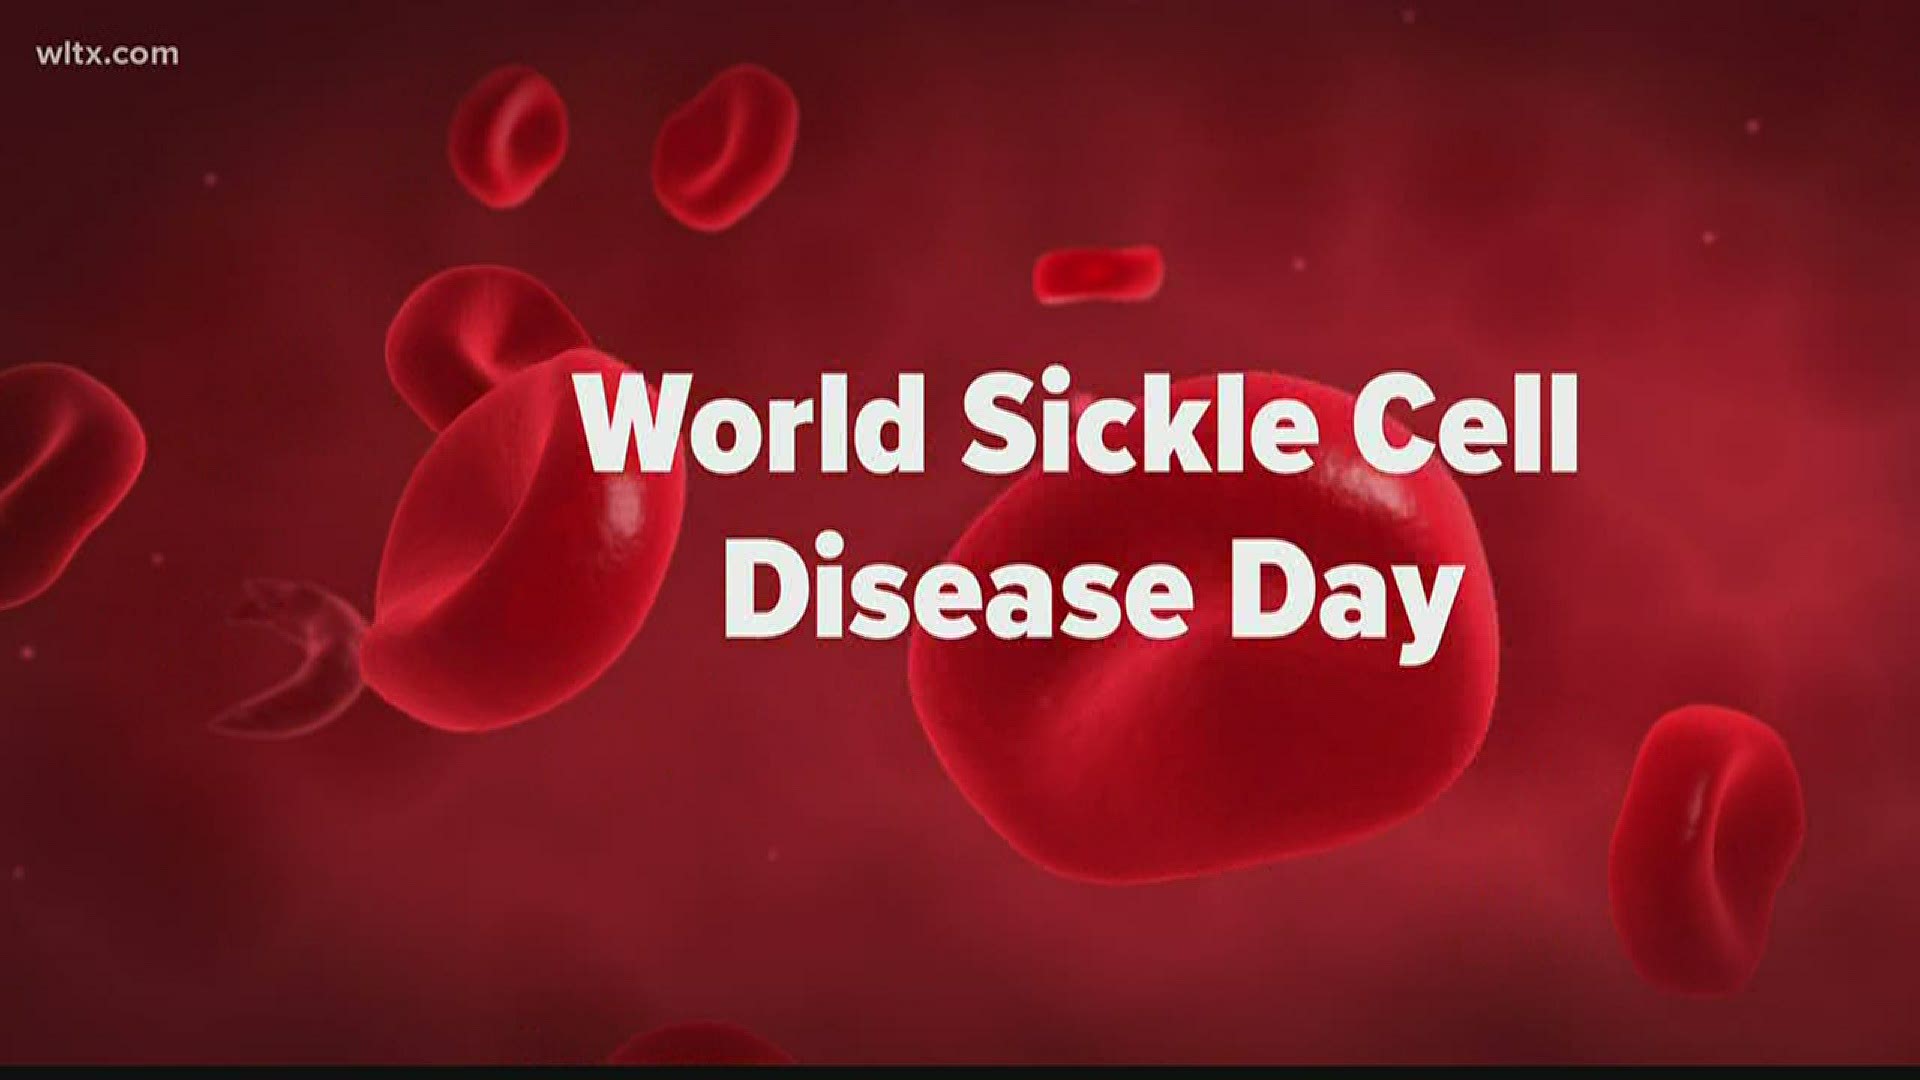 The disease is a blood disorder of red blood cells. The cells become sickle or crescent shaped and have a hard time passing through small blood vessels.